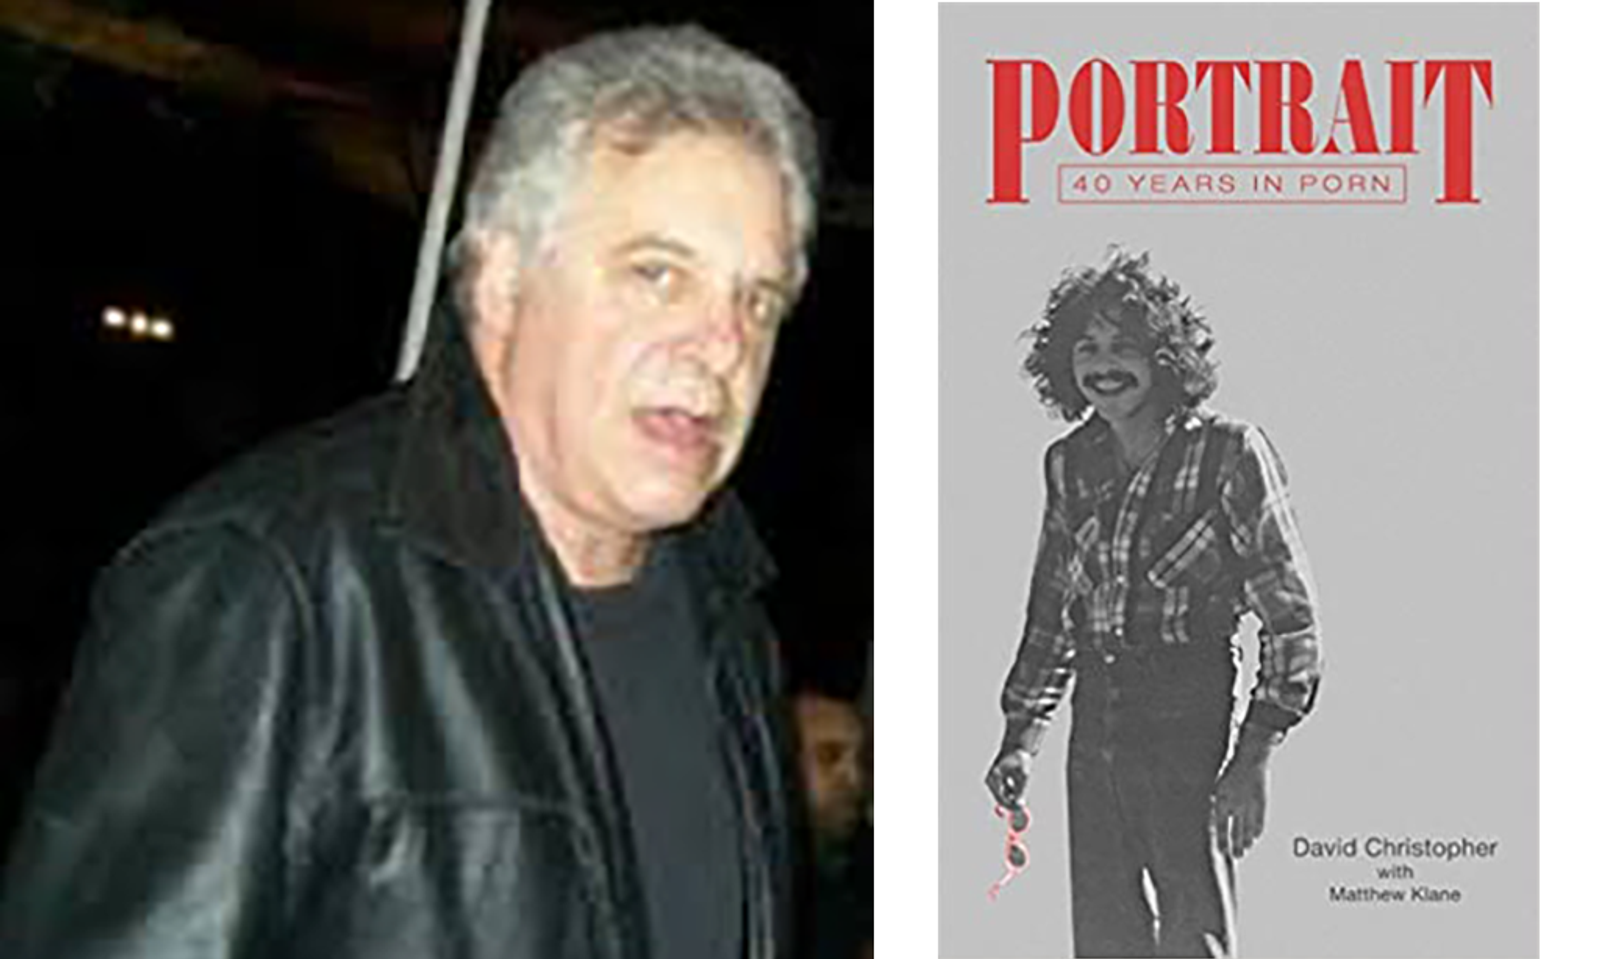 Review: 'Portrait: 40 Years in Porn' by David Christopher